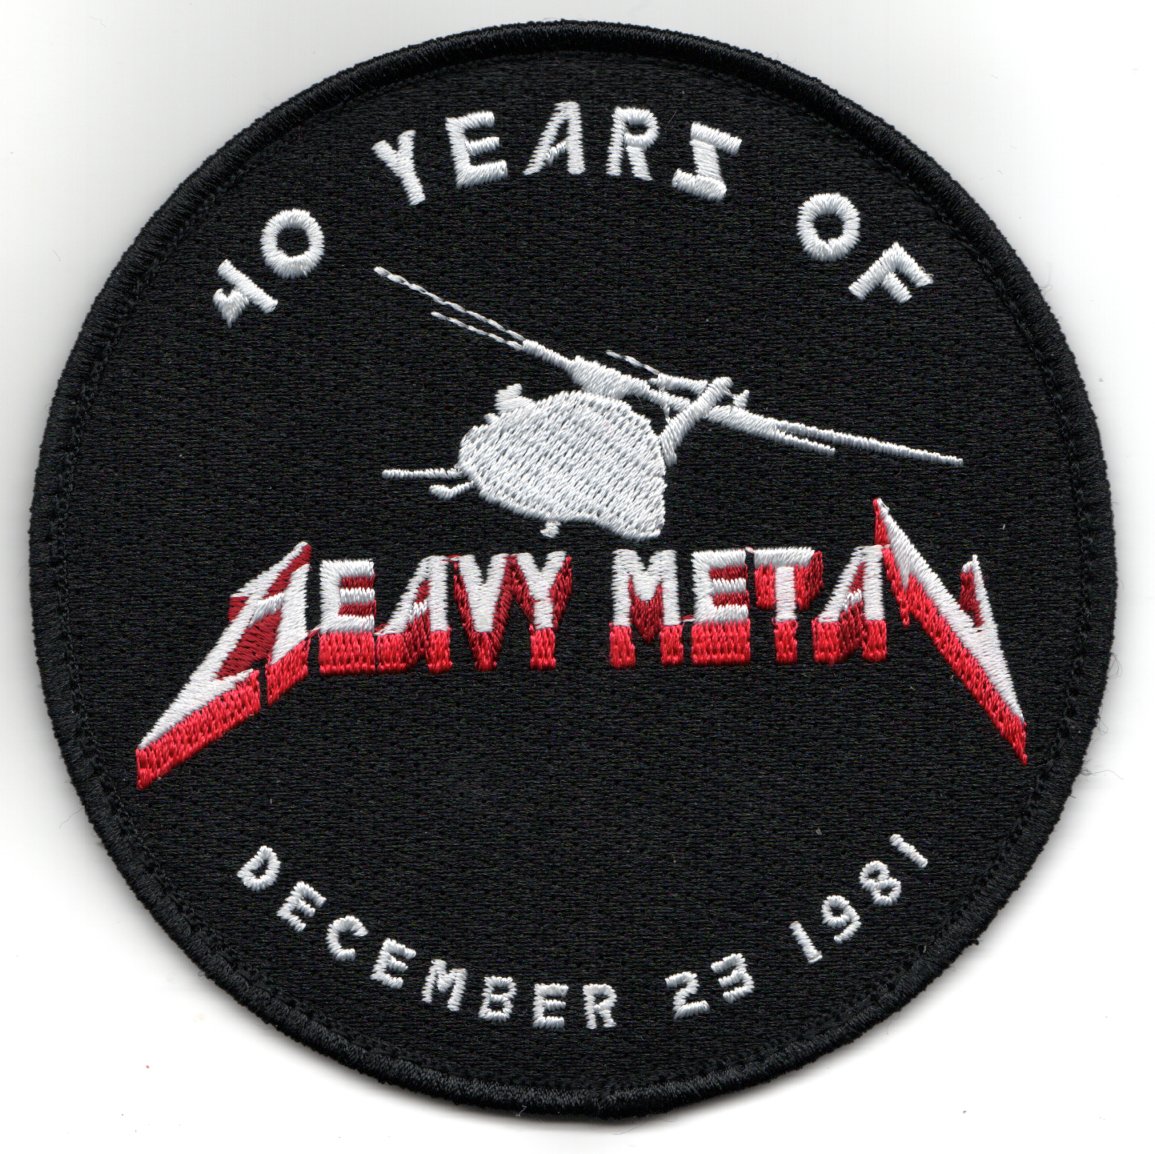 MH-53E '40 YEARS of HEAVY METAL' (Black)